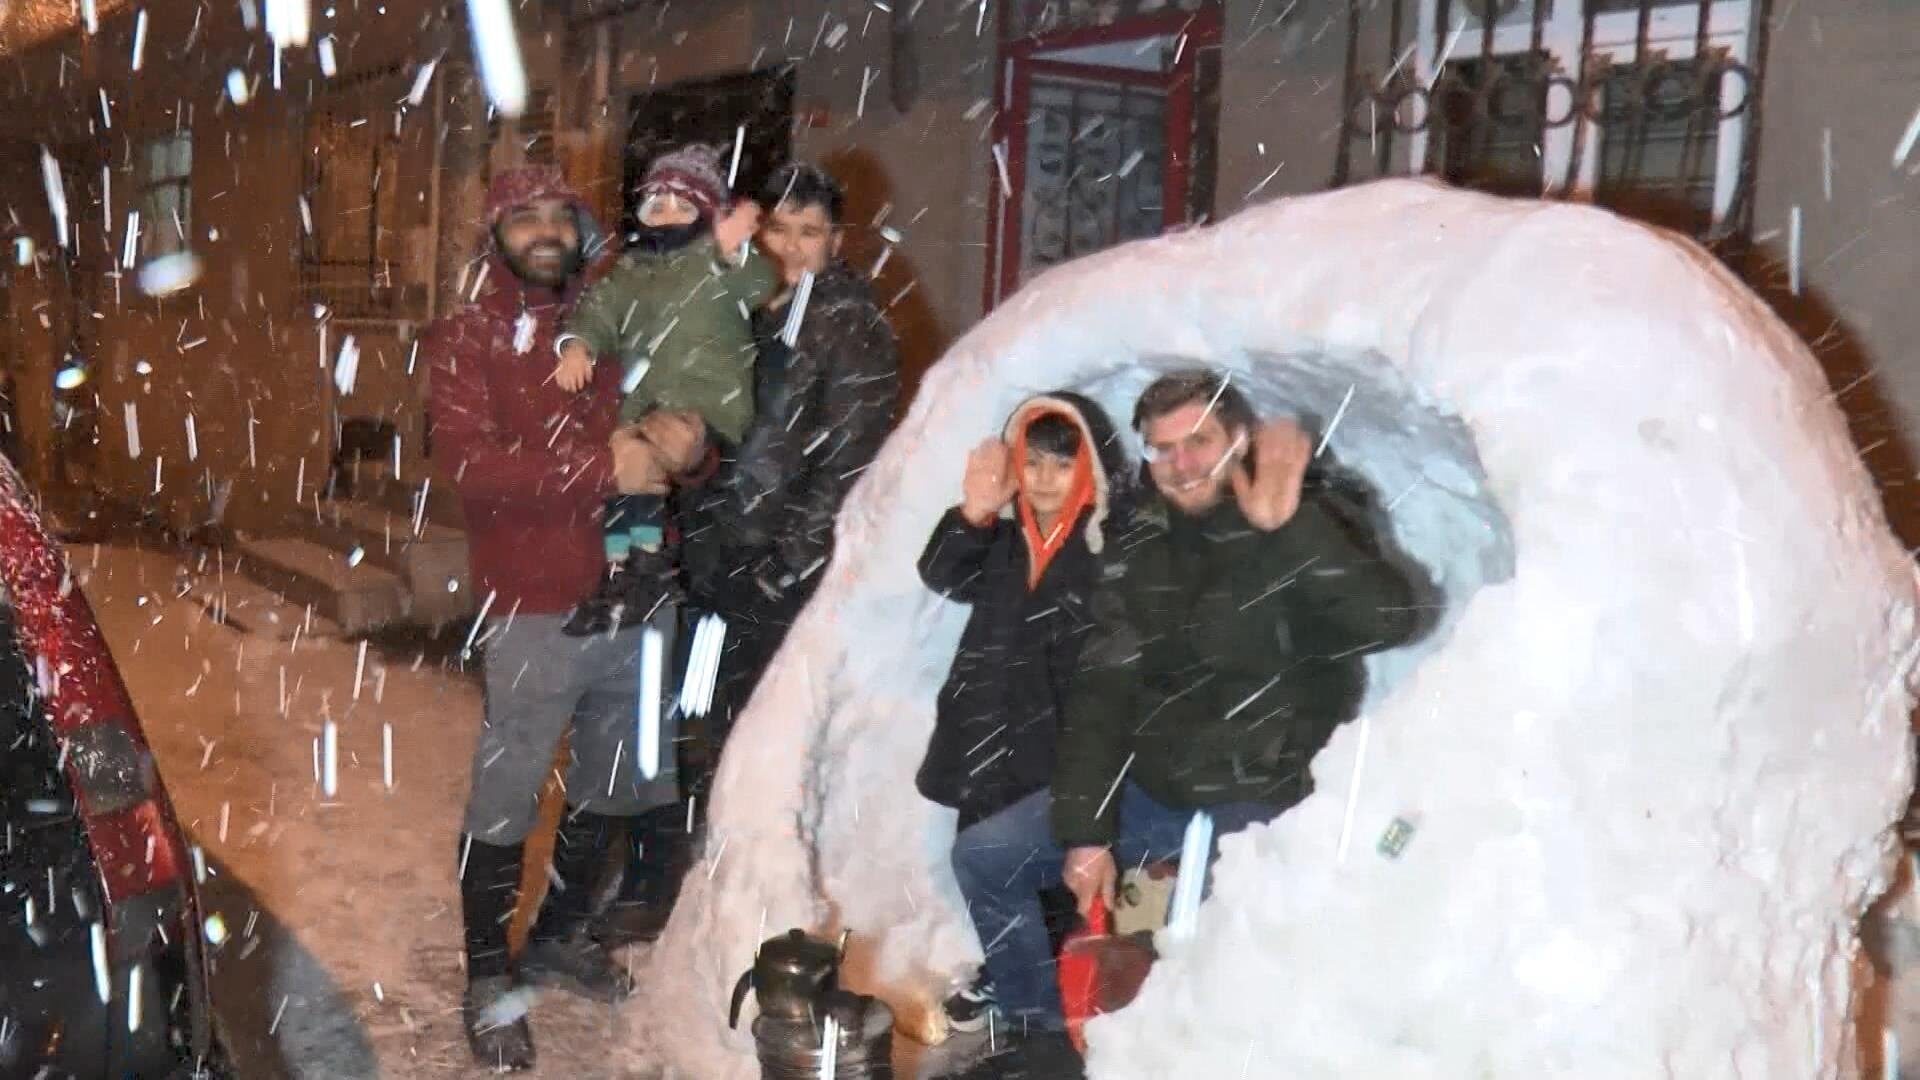 Heavy snowfall in Istanbul inspires locals to build an igloo